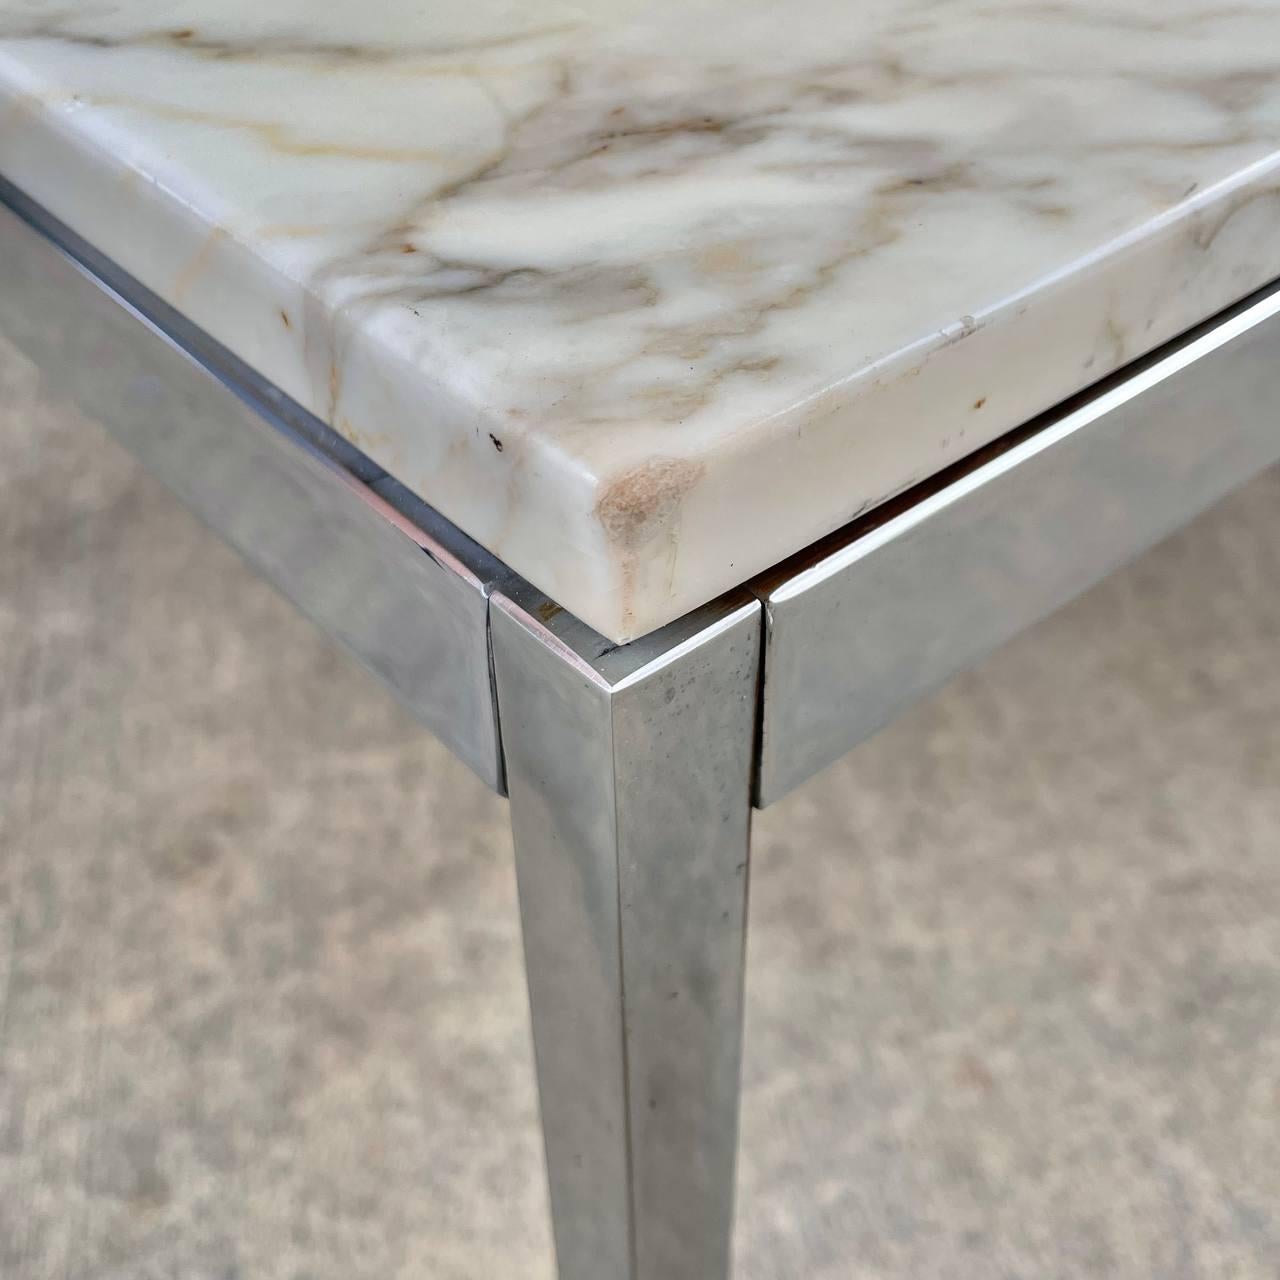 Signed Original Mid-Century Modern Carrara Marble Coffee Table by Knoll For Sale 1